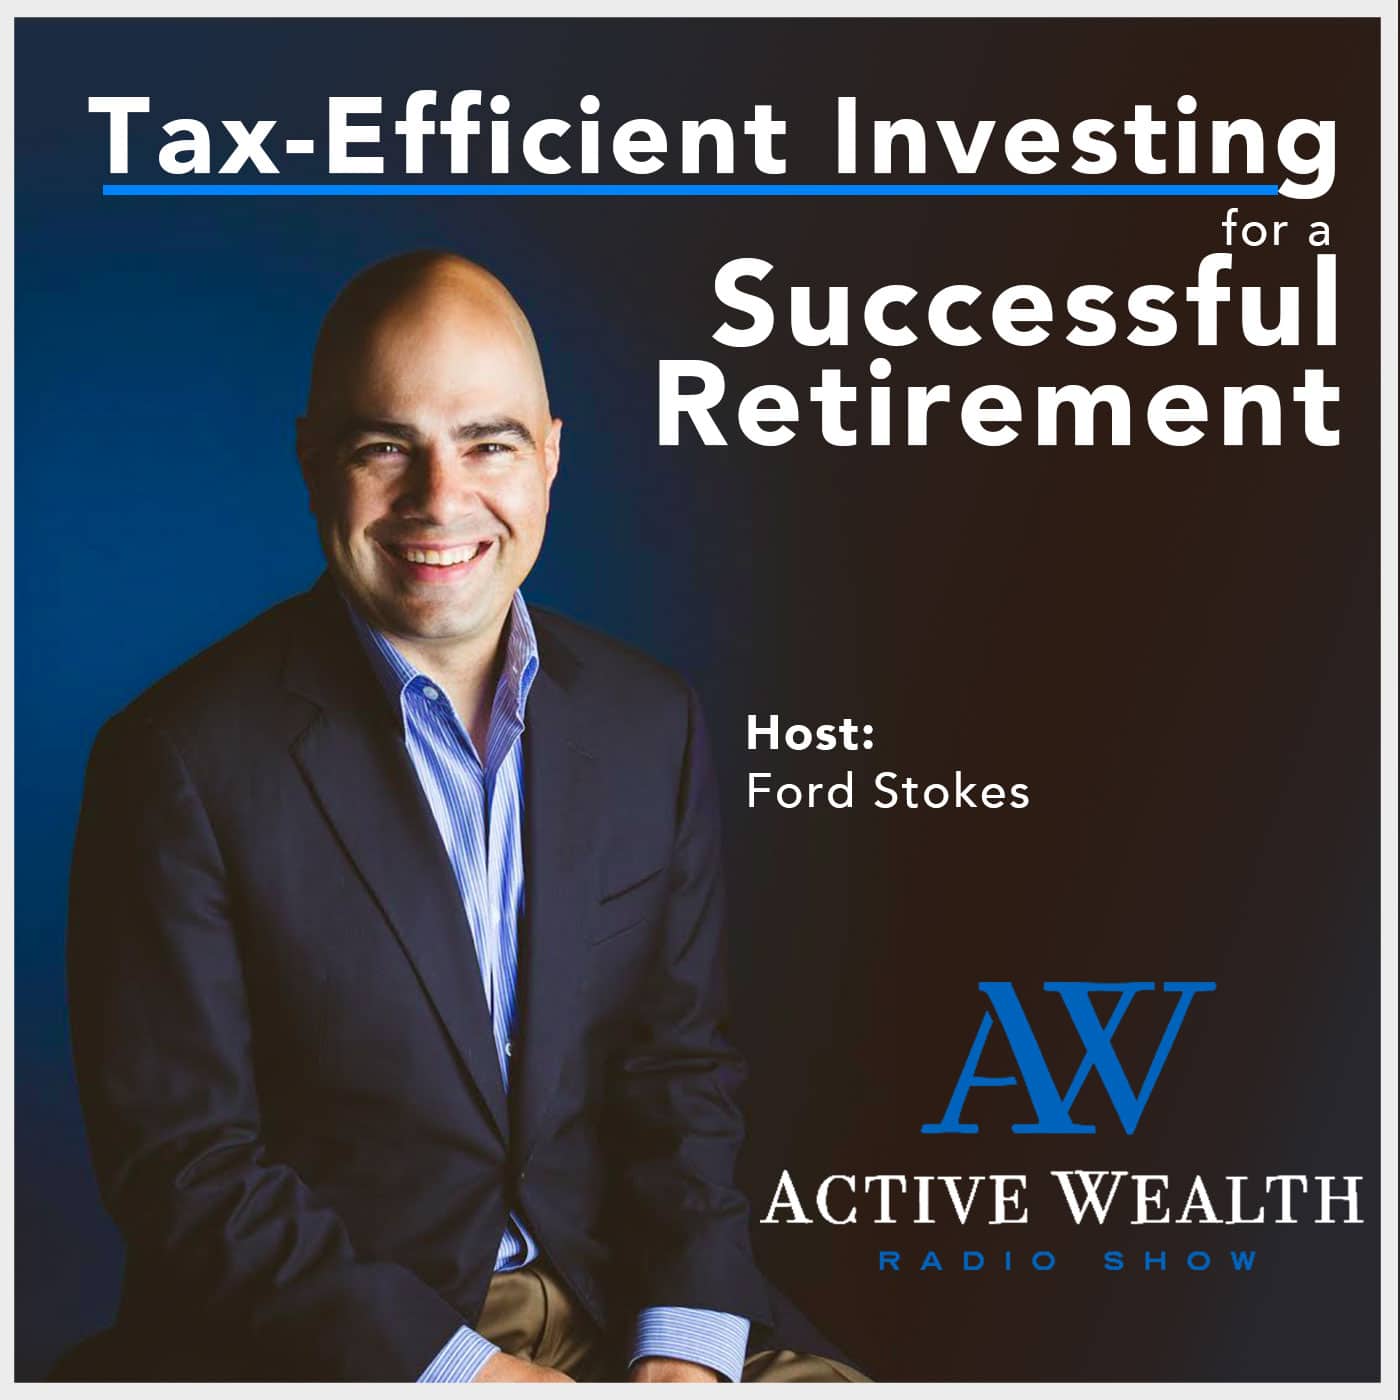 How to Guarantee an Income Stream Throughout Retirement - Interview w/ Josh Lumme